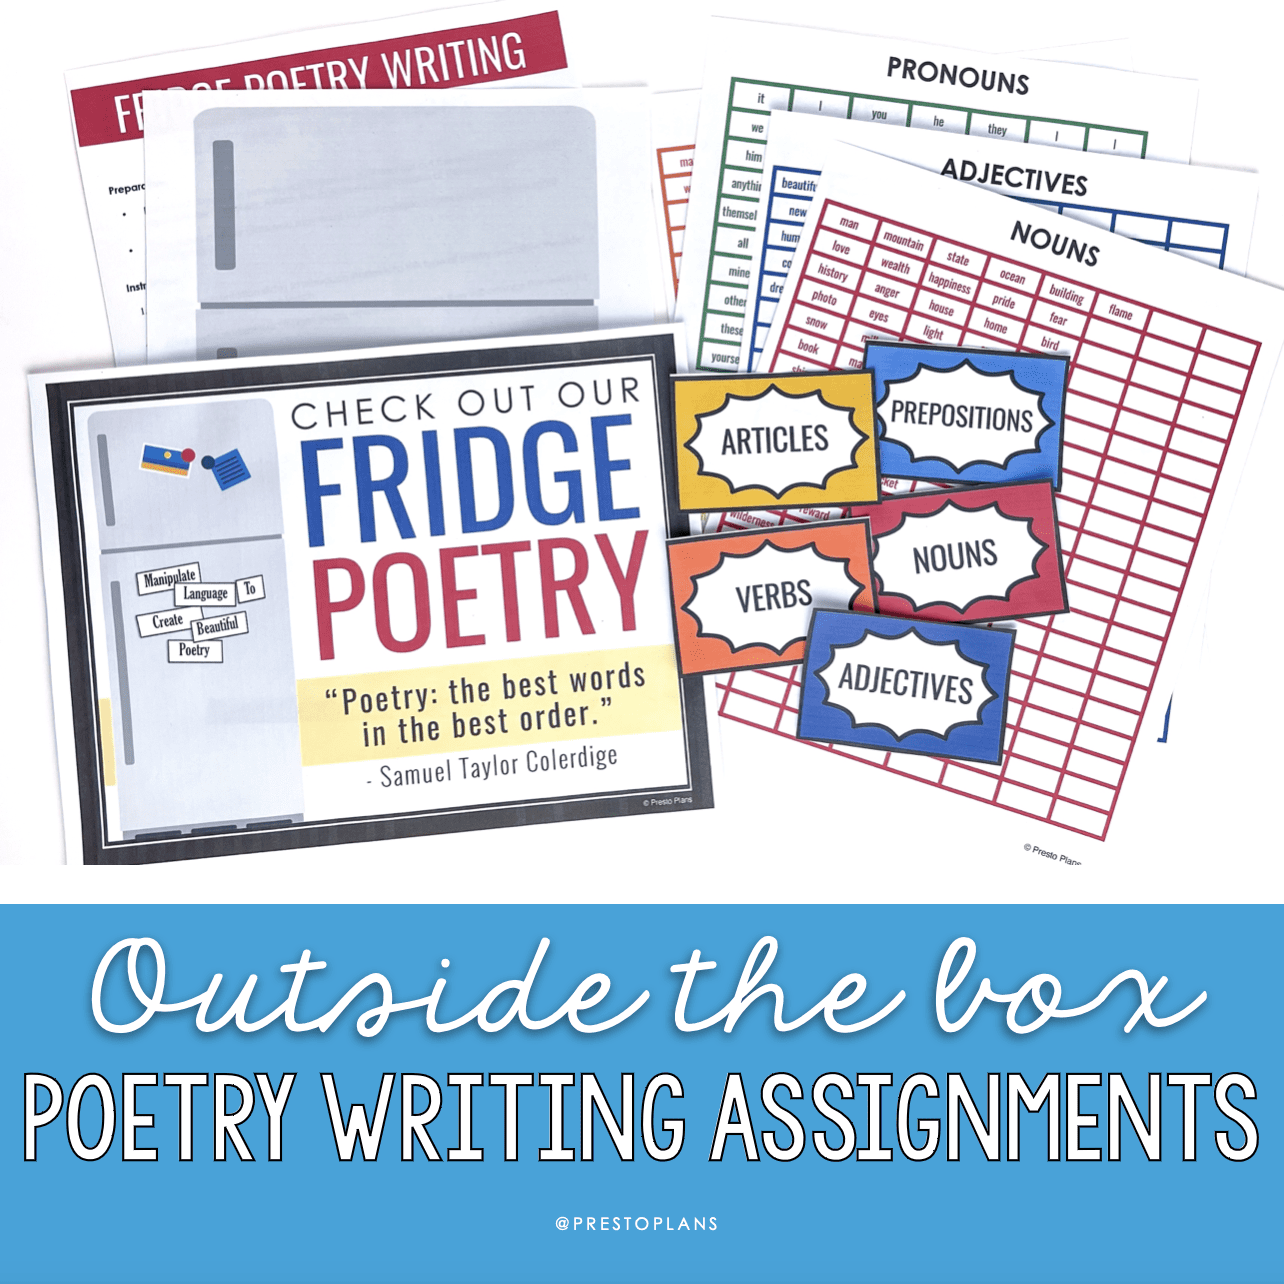 Inspire students with outside-the-box poetry writing assignments!